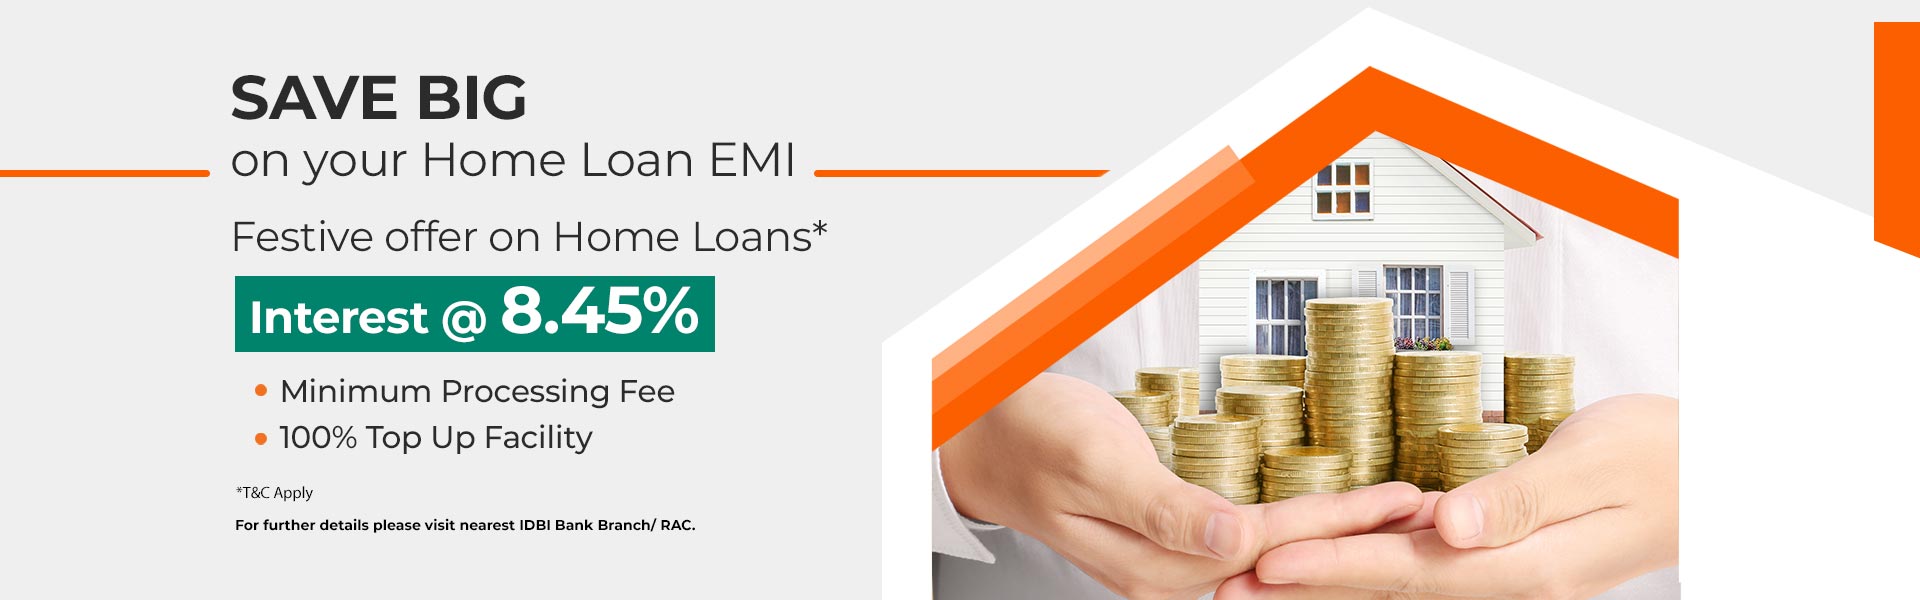 Home Loan at ROI of 8.65%.